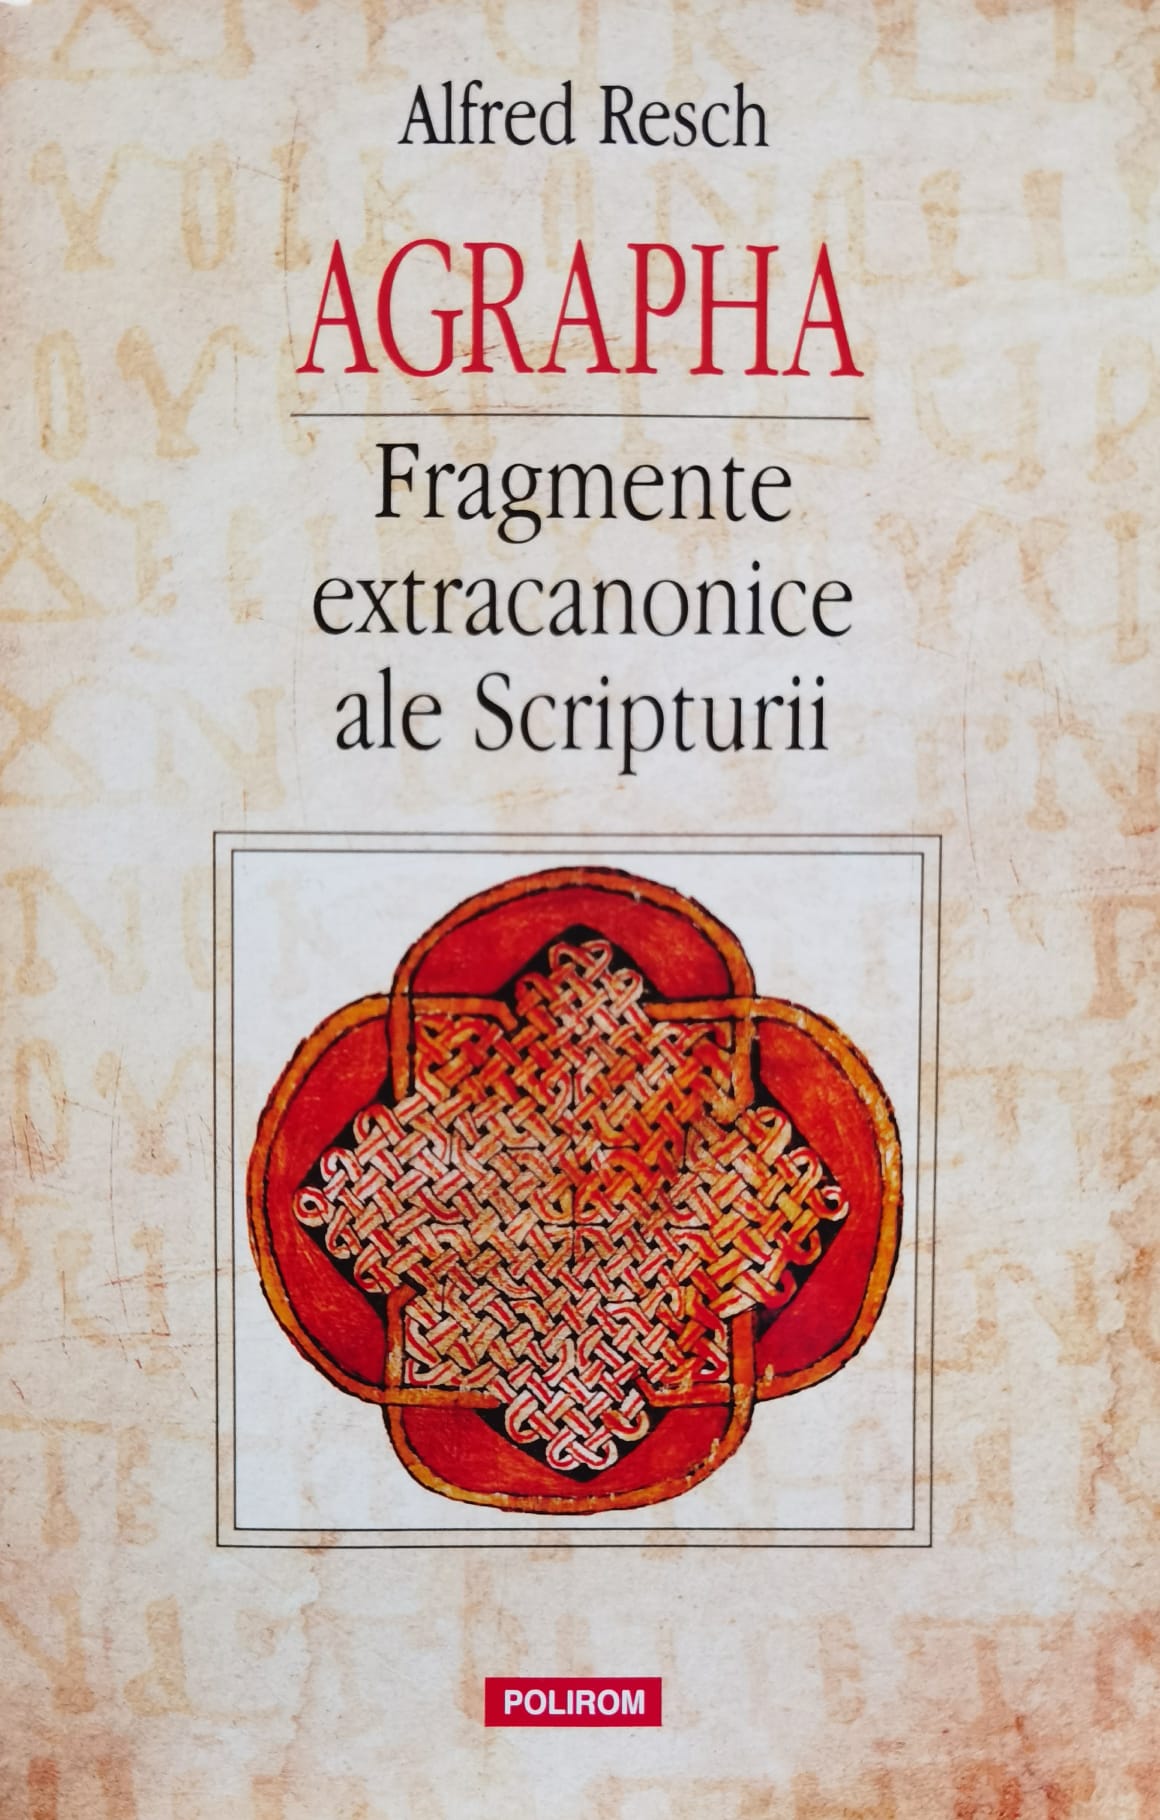 agrapha fragmente extracanonice ale scripturii                                                       alfred resch                                                                                        